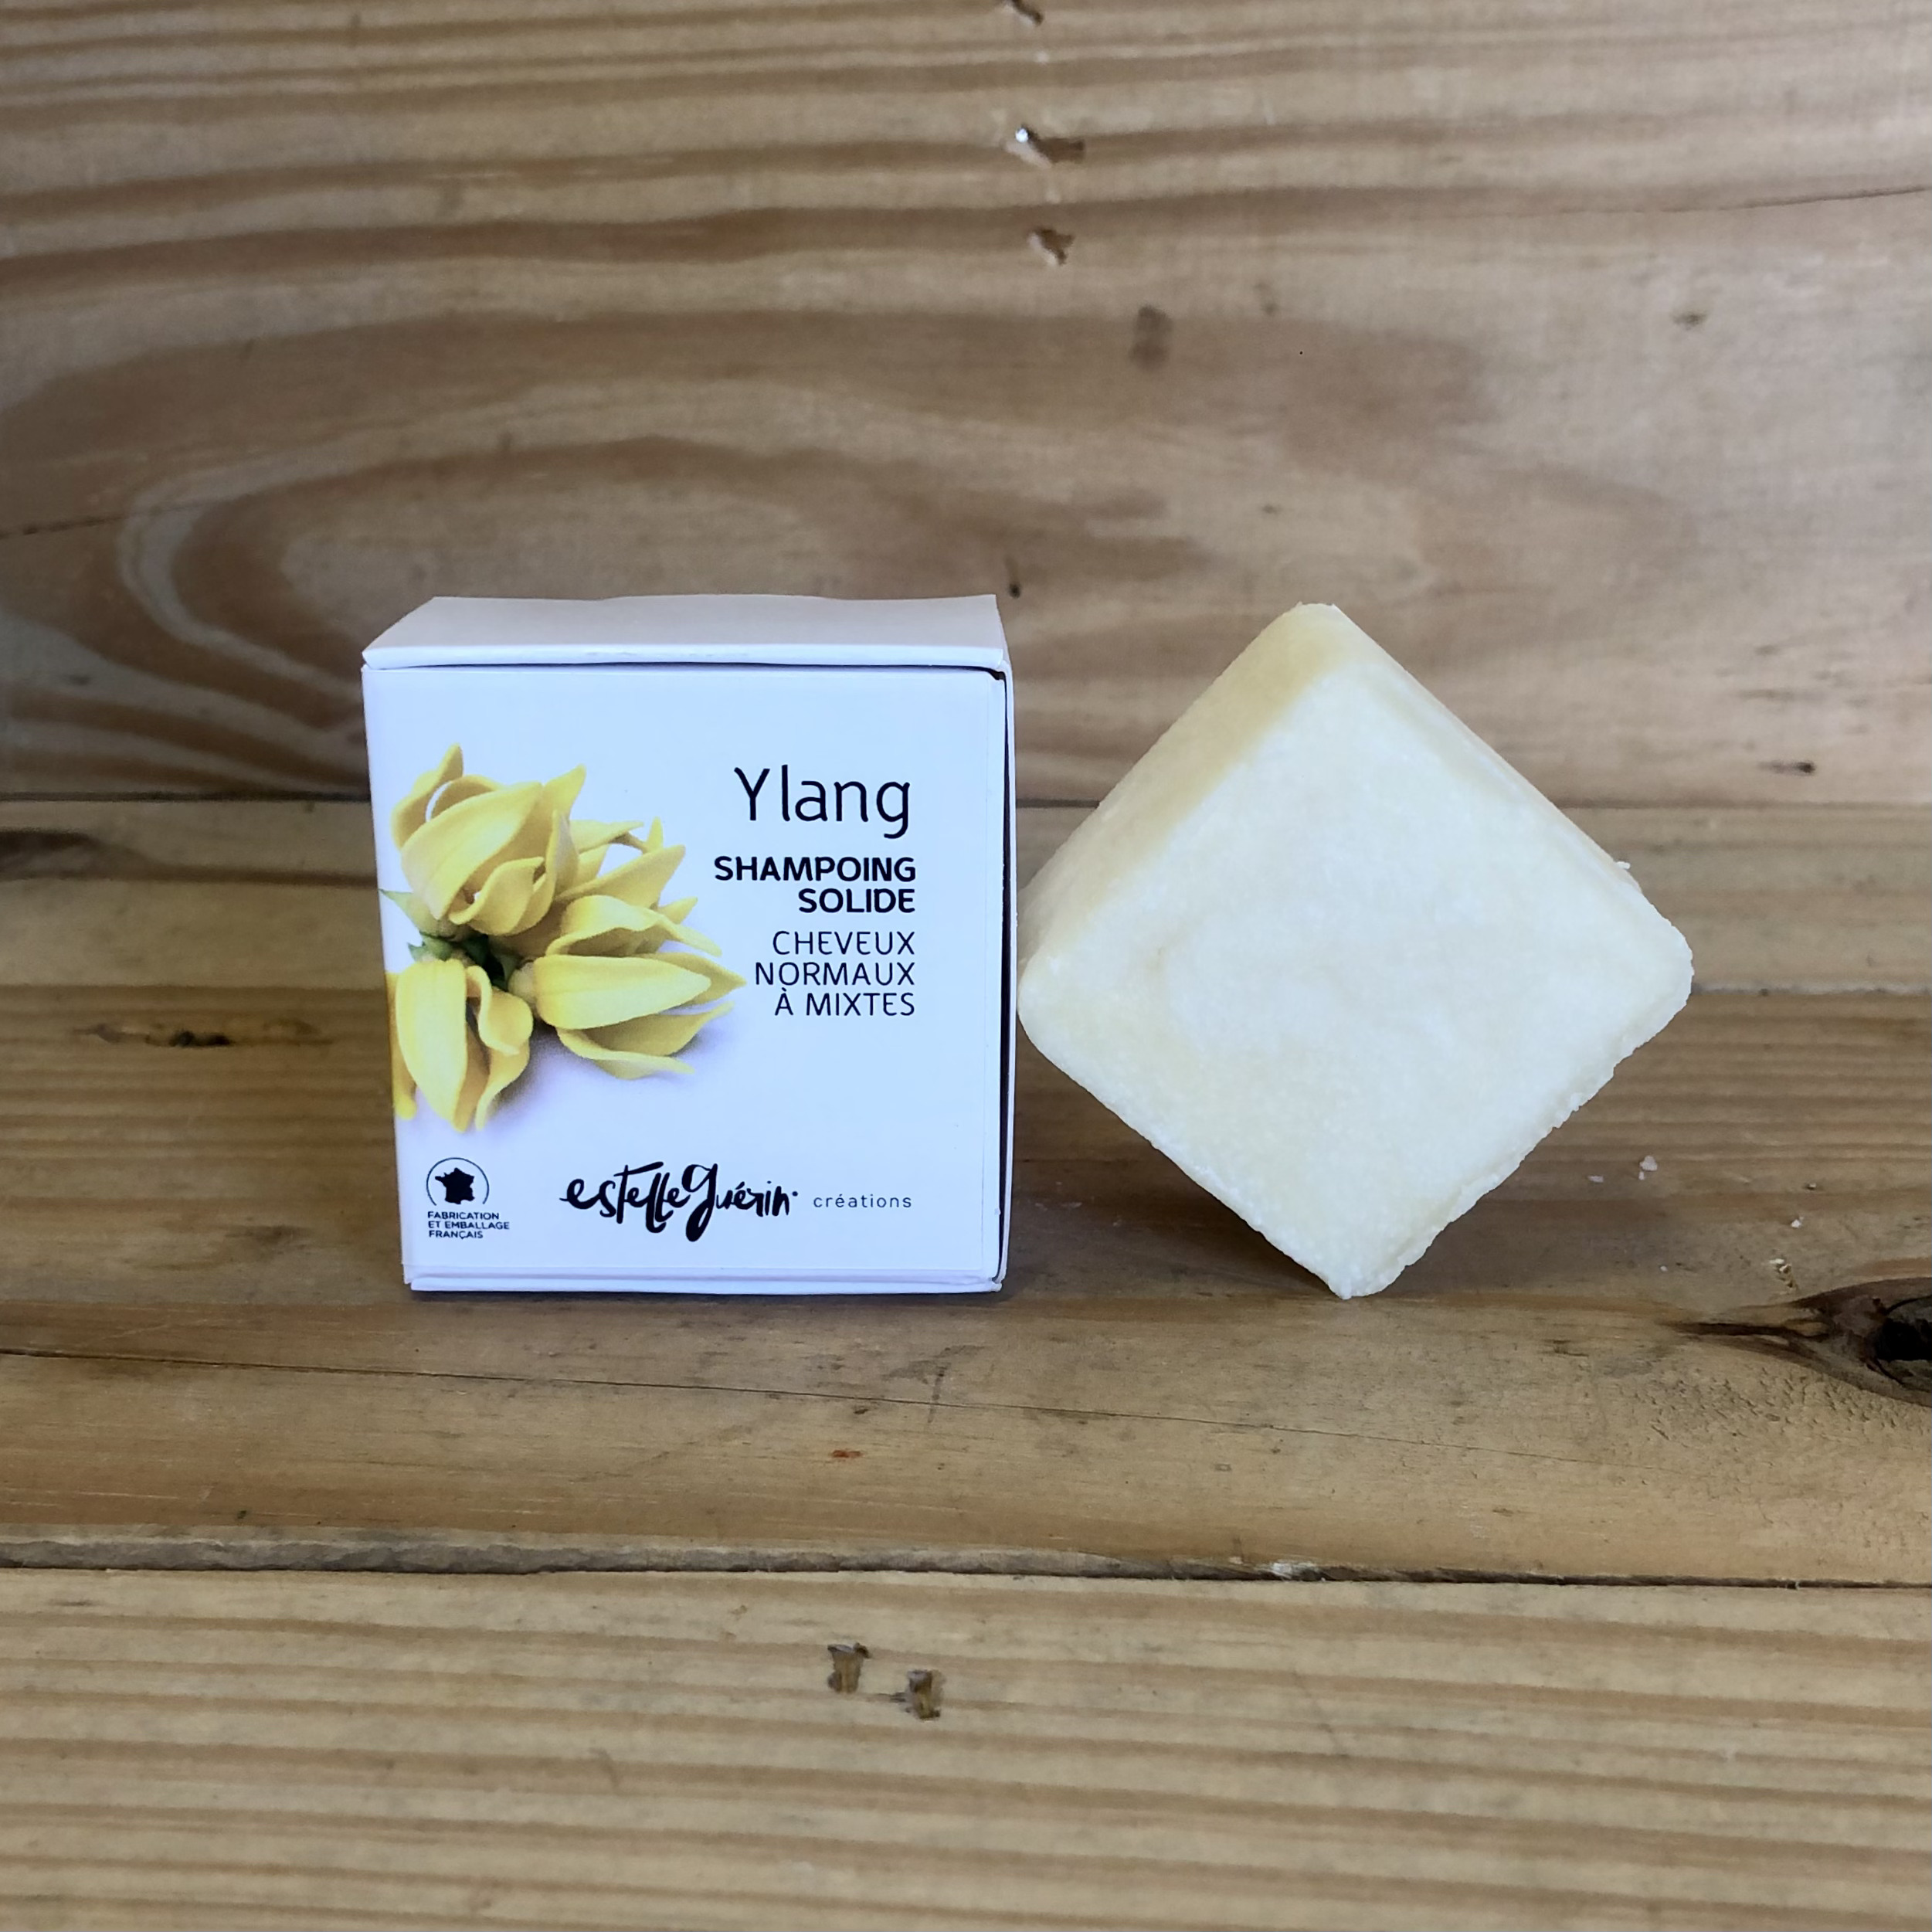 Shampoing solide ylang 60g